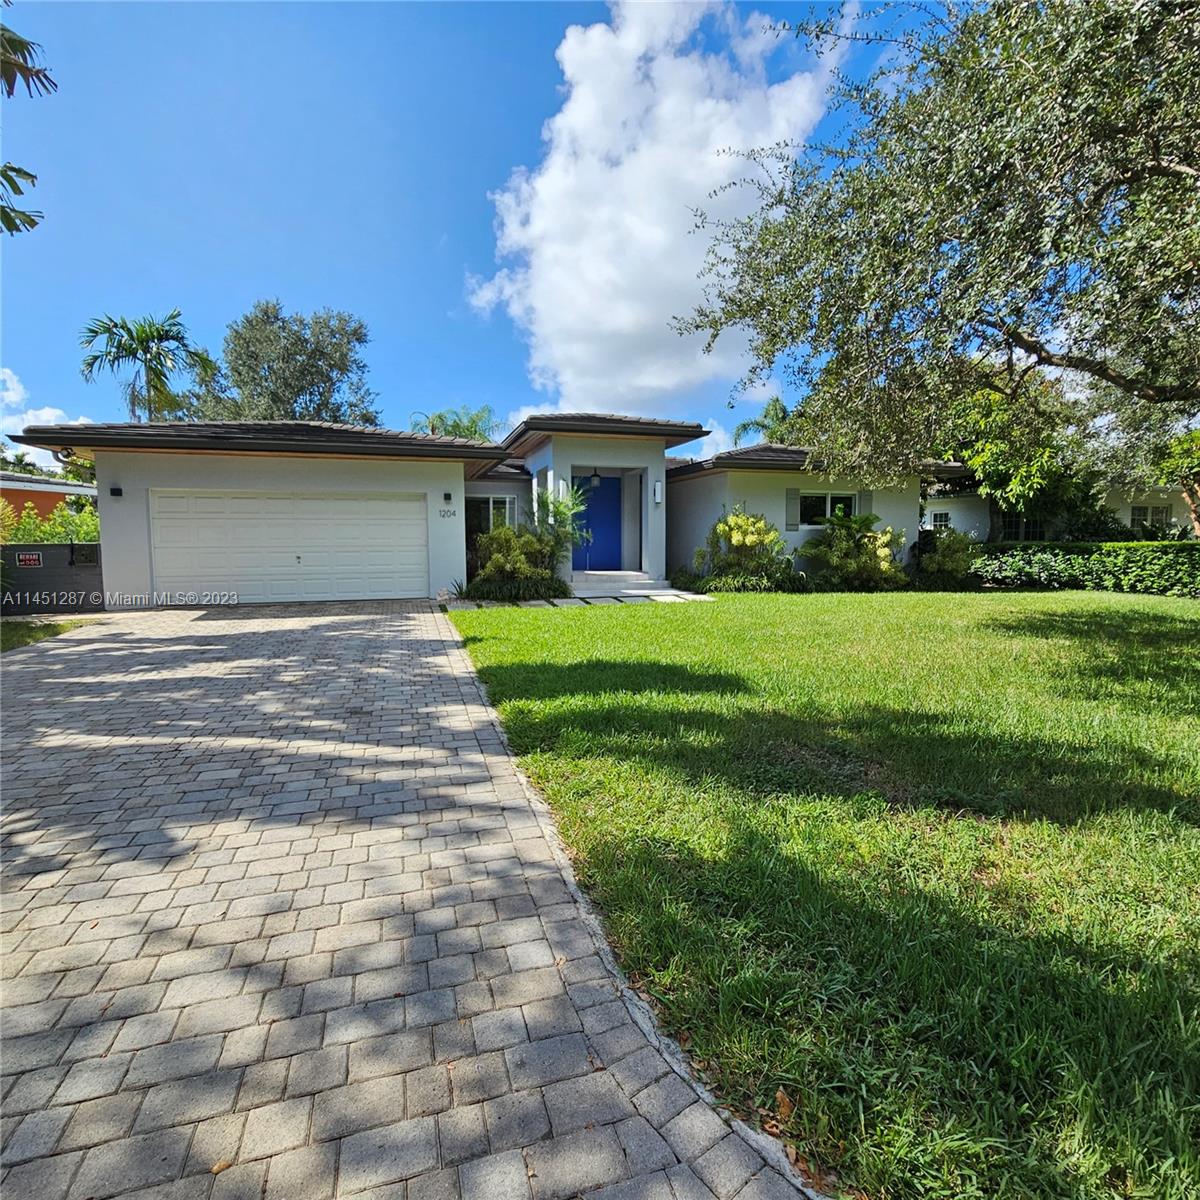 A gem in South Gables! Perfect location, East of US1, near to UM & metrorail, for quick access to upscale Coral Gables shopping/dining area, Coconut Grove & Brickell.  Completely renovated in 2021, this beautiful home on a quiet street, futures 4 bedrooms & 5 bathrooms. Enjoy the natural light as soon as you enter an ample living-dining area that flows to a family room and kitchen in an open plan concept. Italian cabinets kitchen w an oversized island perfect for entertaining. Contemporary 36x36 porcelain floor in public areas & wood floor in bedrooms. Master bedroom has a relaxing view & pool access. High quality finishing materials & fixtures in bathrooms.  Enjoy the private backyard & pool surrounded by a nice landscape. Don’t miss this opportunity to live in the best of Coral Gables!